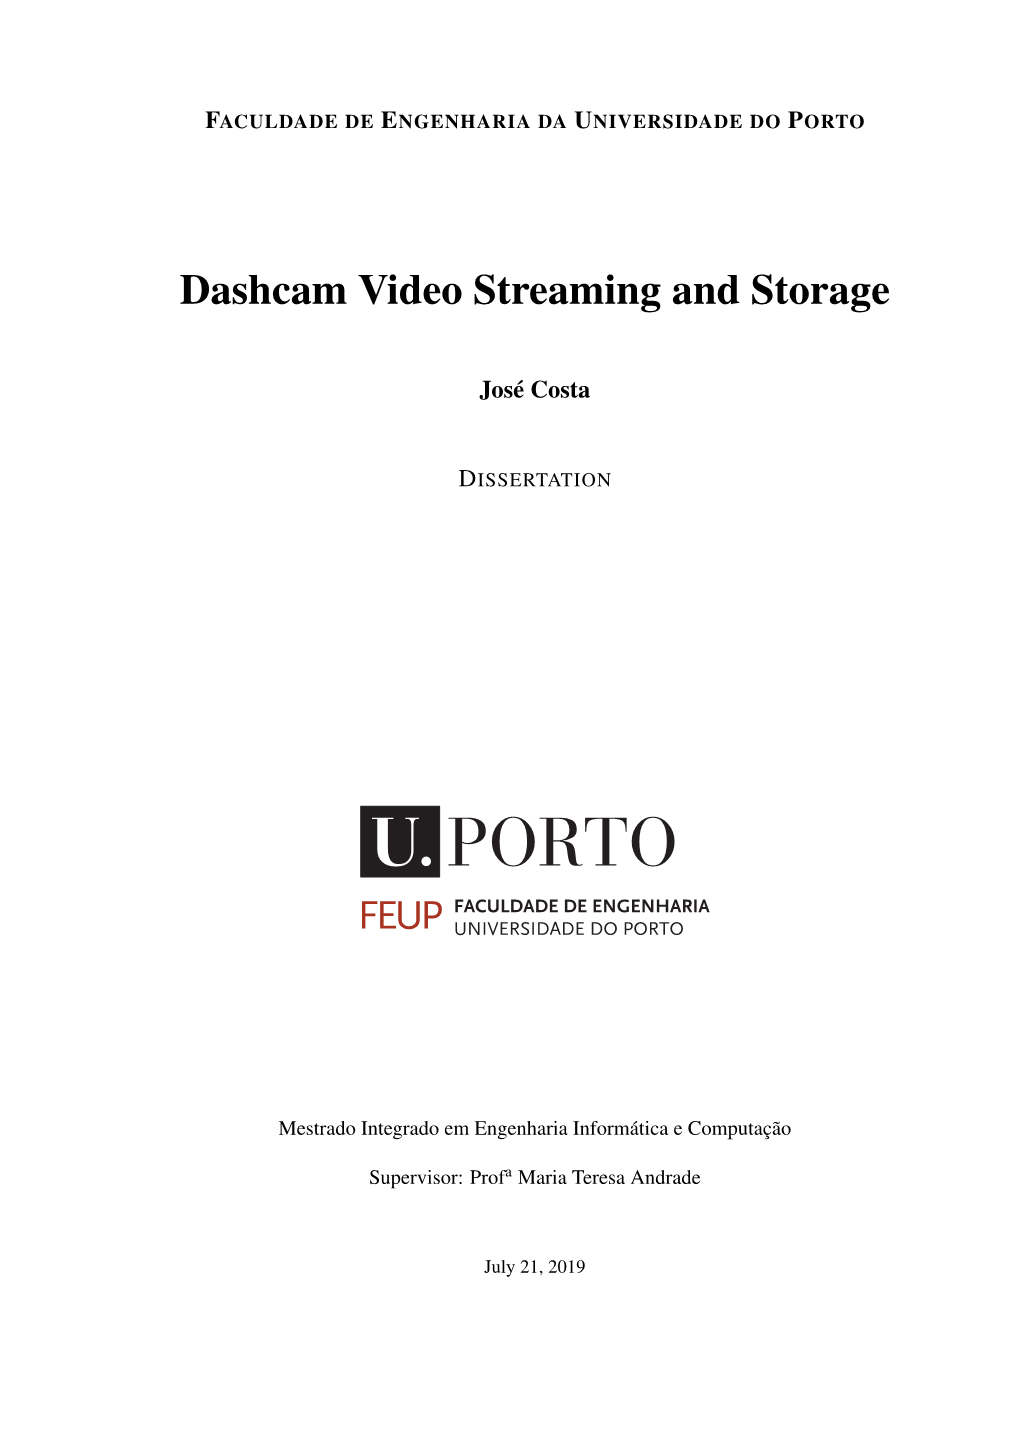 Dashcam Video Streaming and Storage